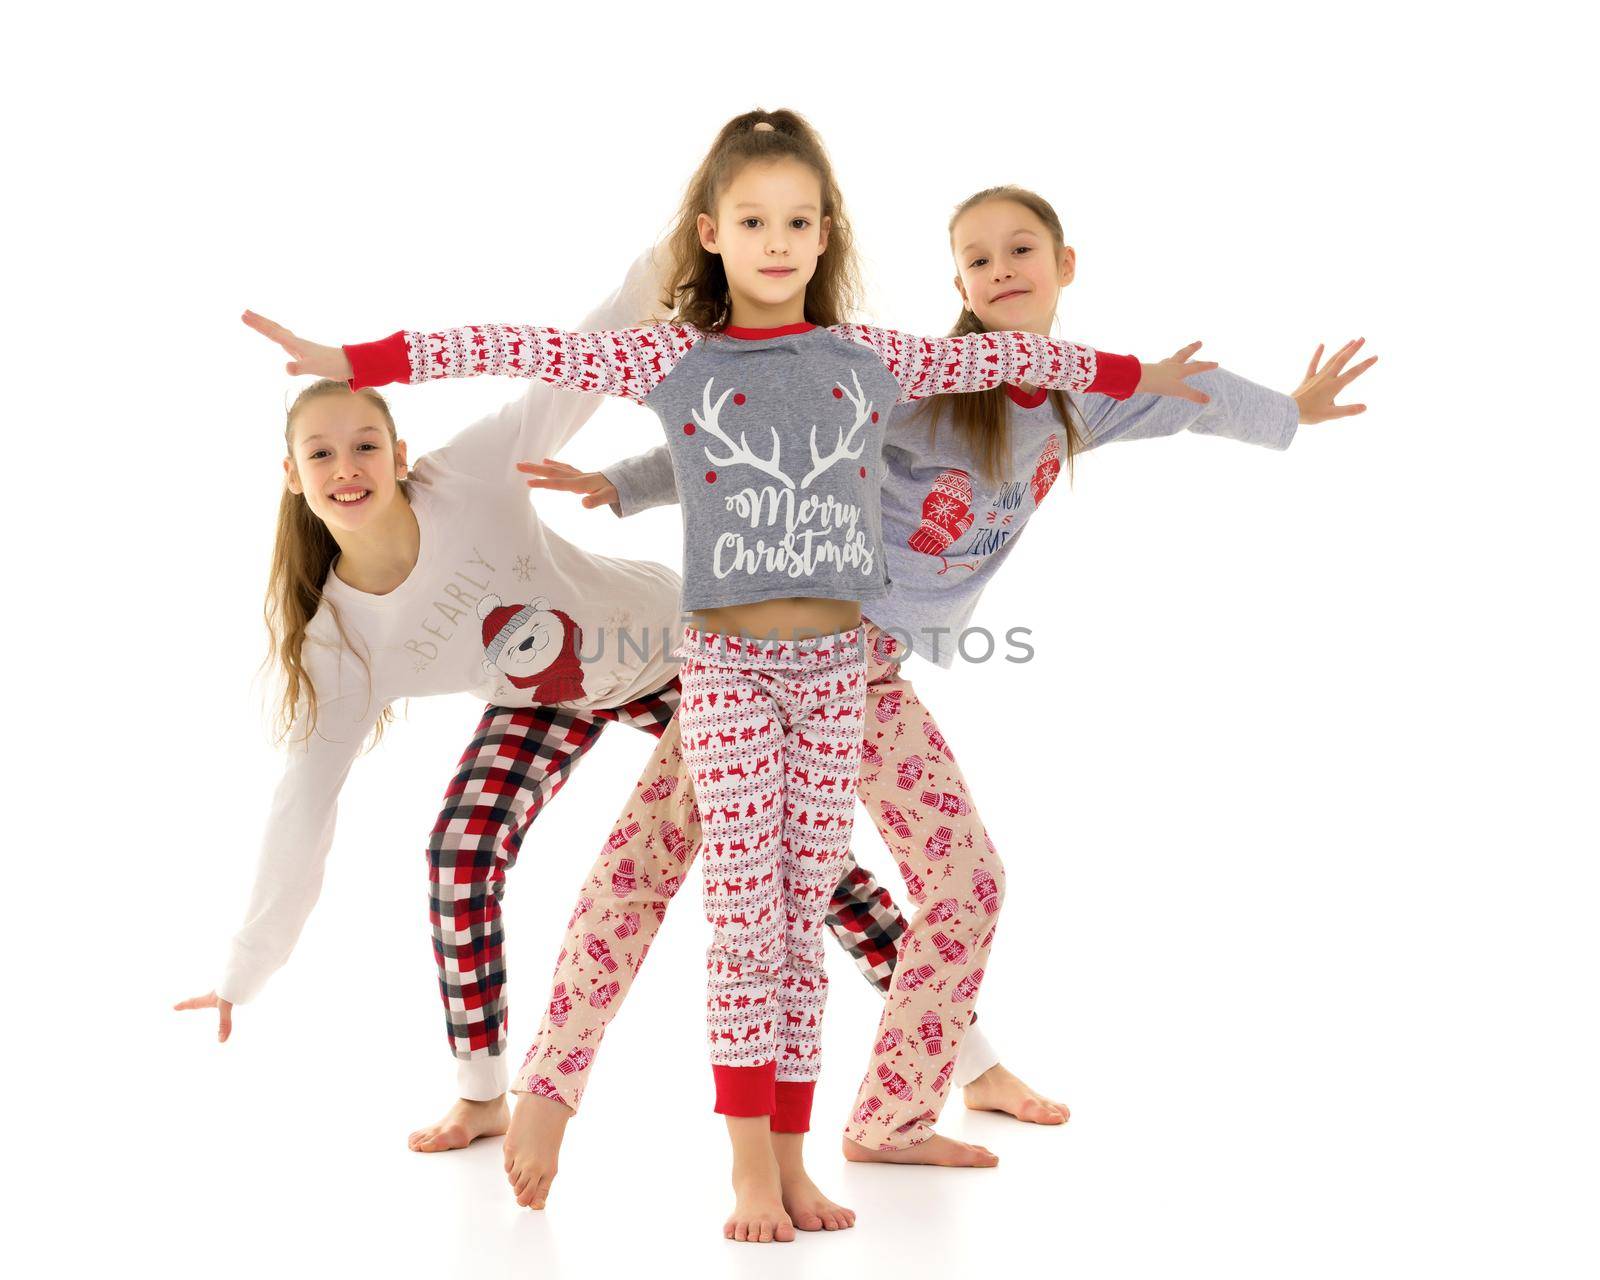 The company of little girls have fun in the studio on a white background. by kolesnikov_studio